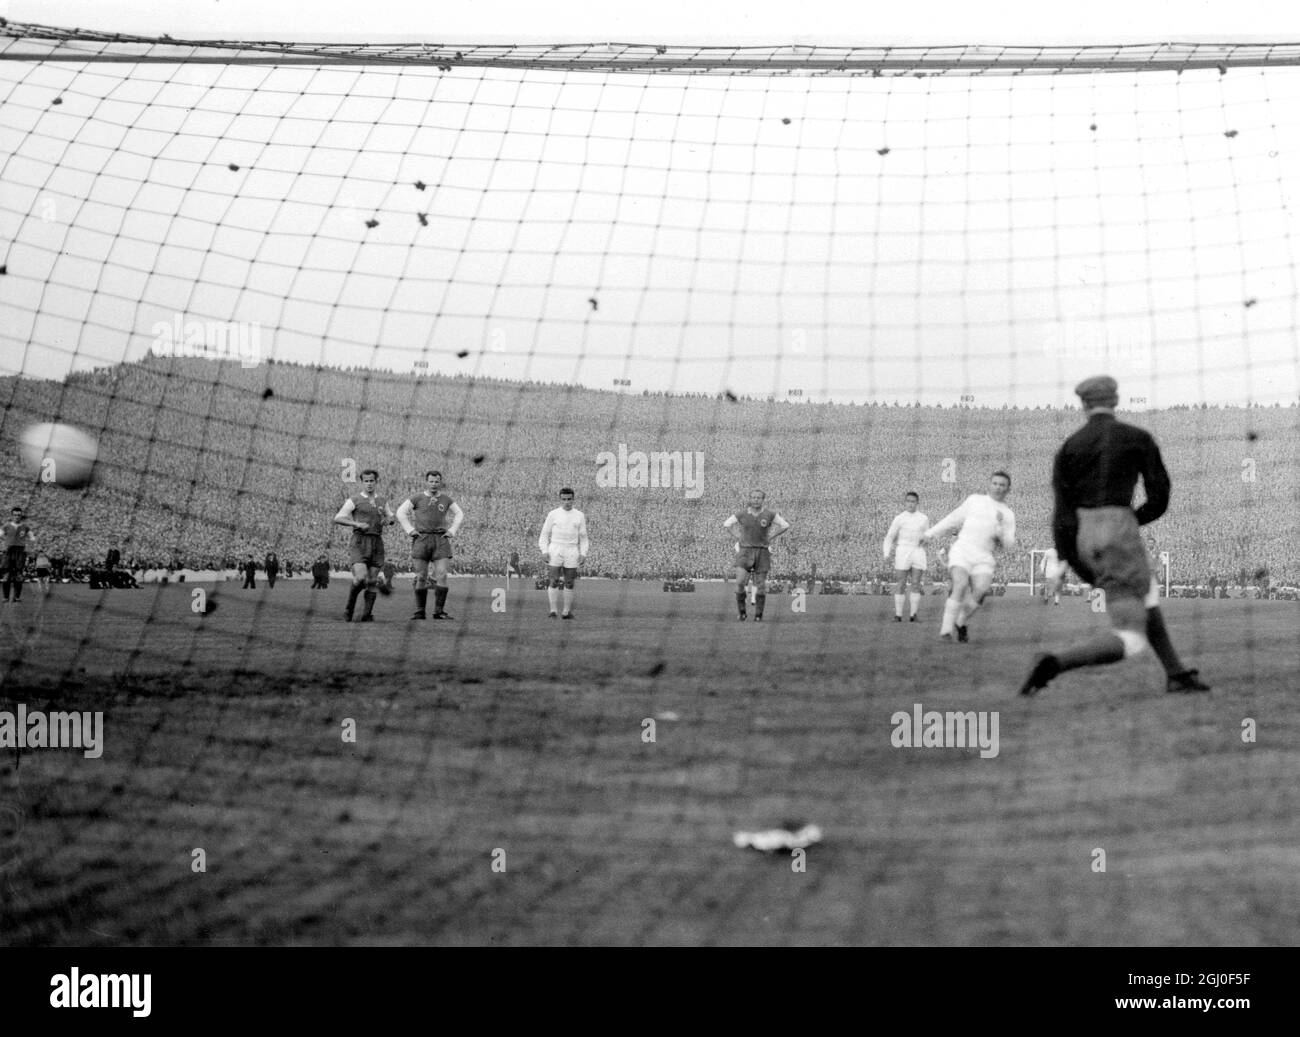 Hungarian Footballer Ferenc Puskas, who plays for Real Madrid (left of goalkeeper) flicks the ball into the net from a penalty kick to mark up Real Madrid's fourth goal against Eintracht Frankfurt during their Euorpean Cup Final match at Hampden Park. Real Madrid won 7-3 and won the European Cup for the fifth time. 18th May 1960 Stock Photo